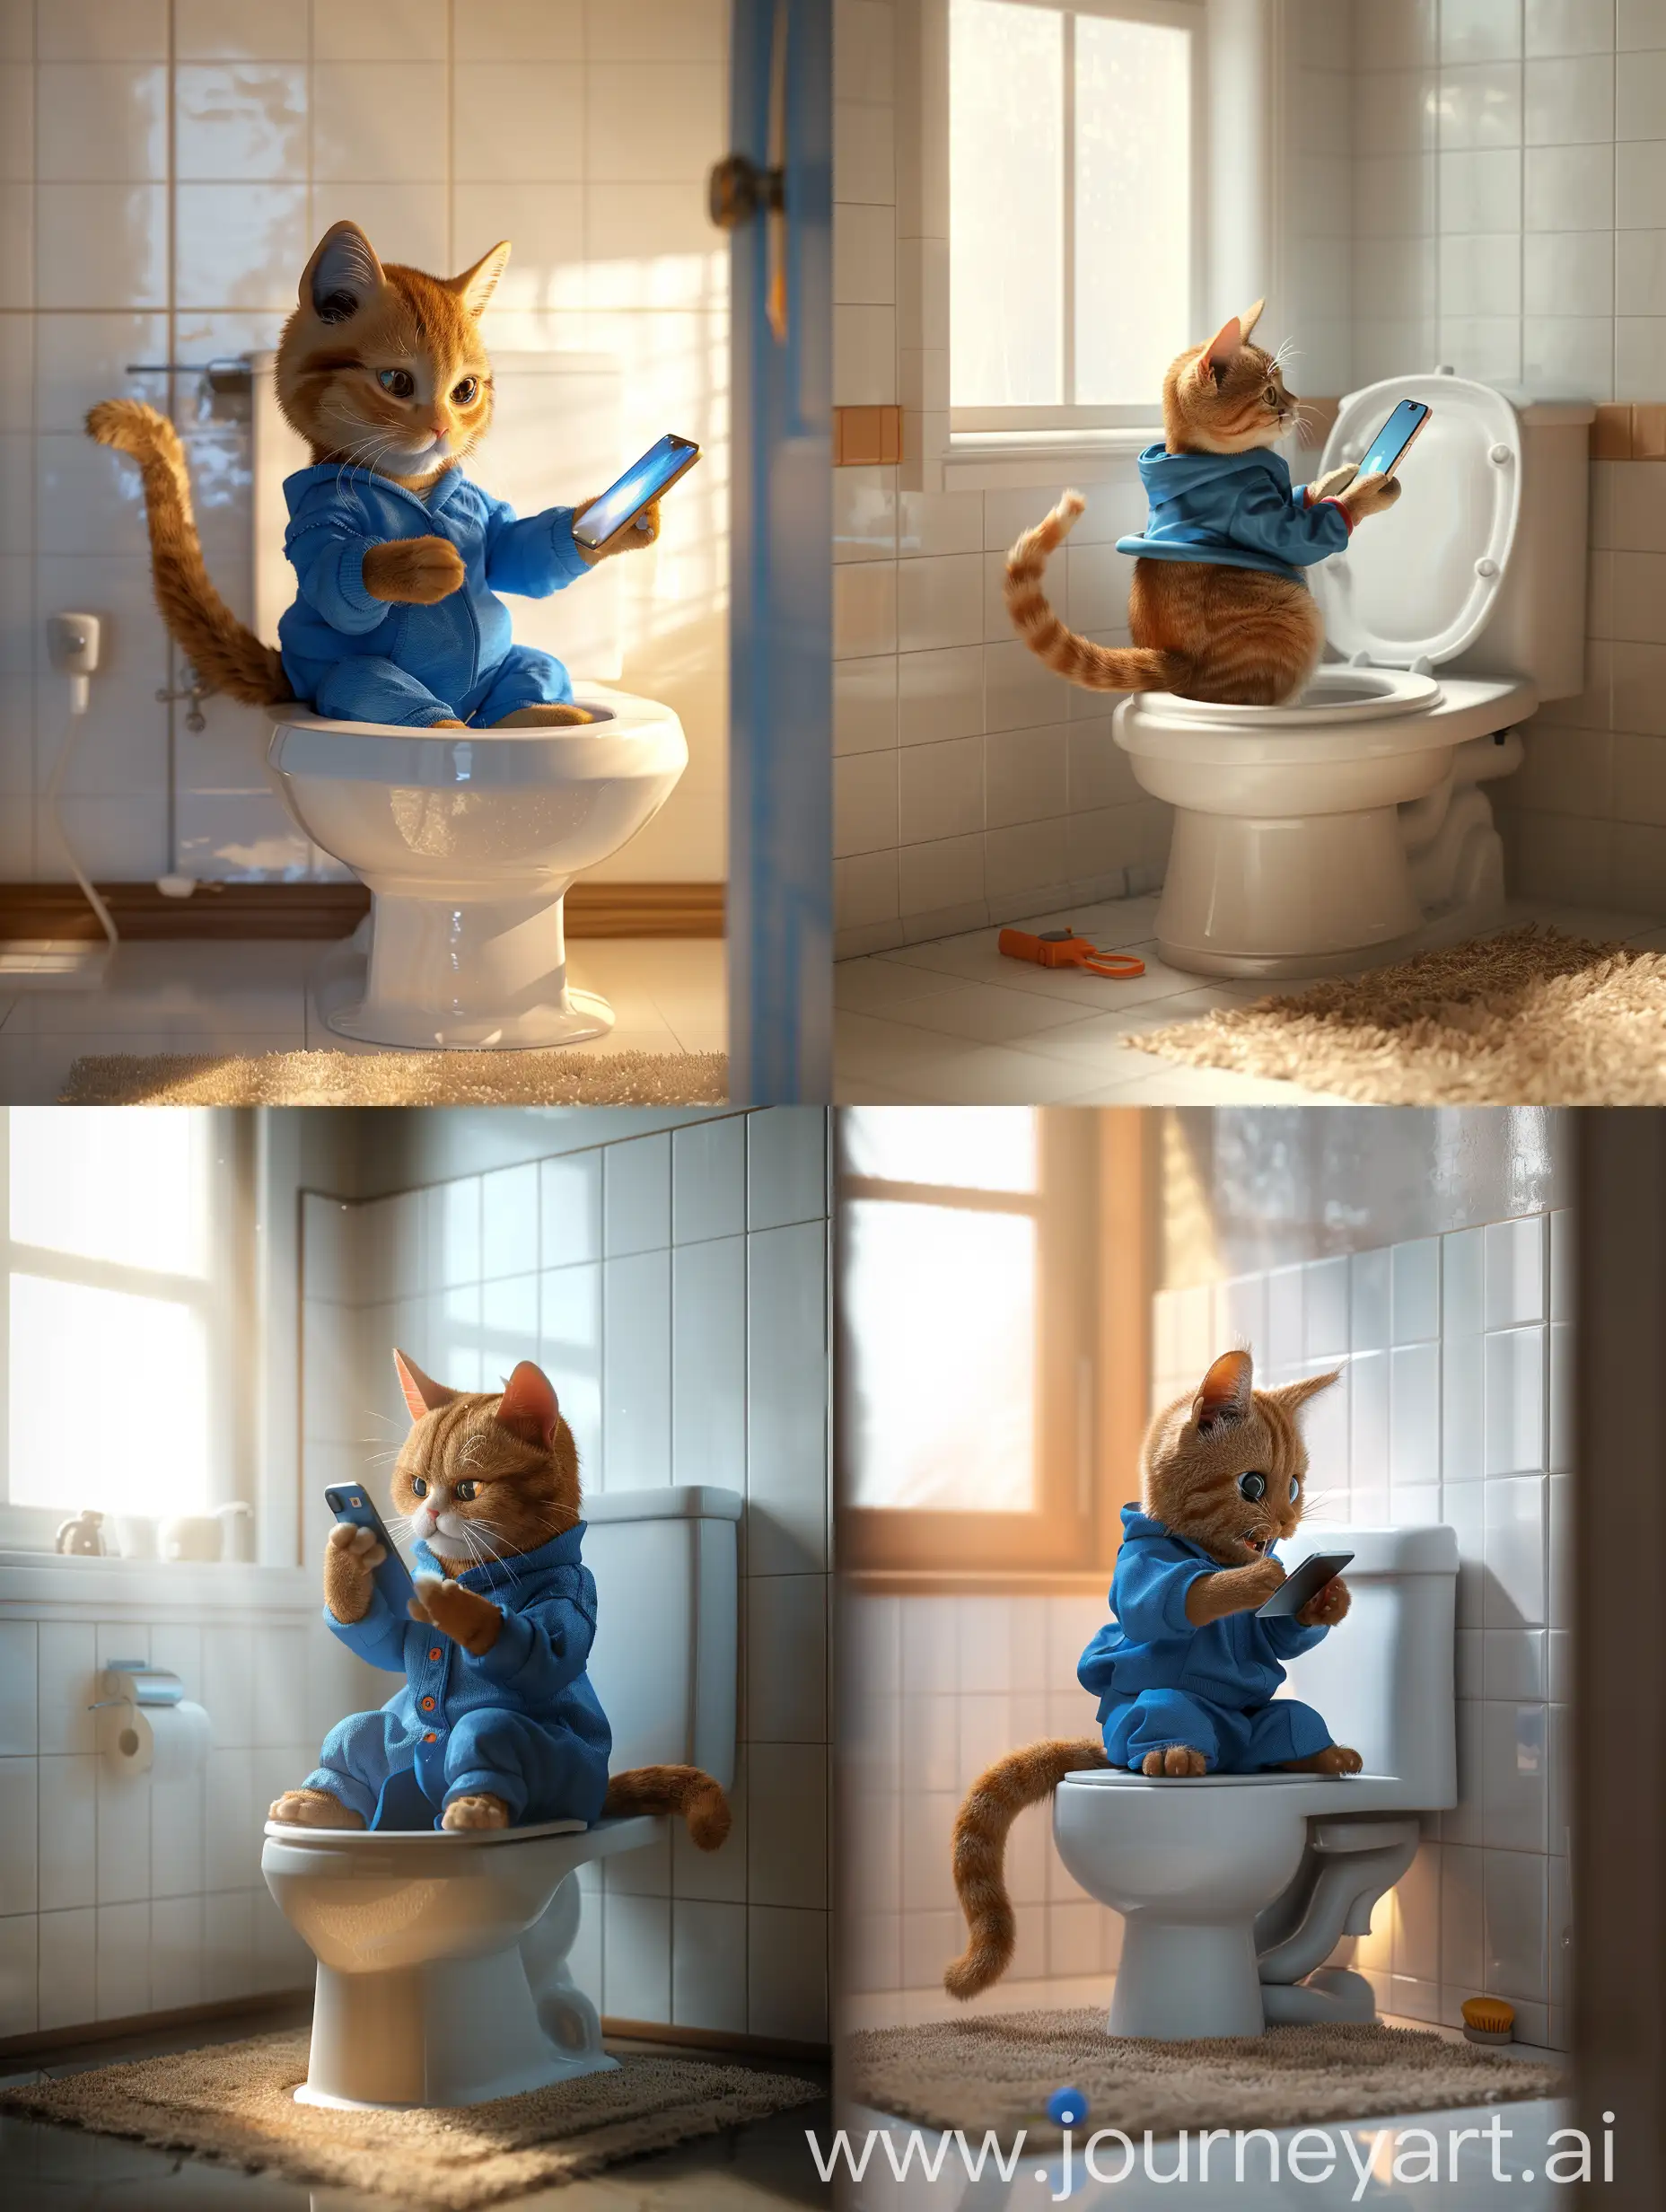 Playful-Tabby-Cat-in-Blue-Clothing-with-iPhone-15-on-Toilet